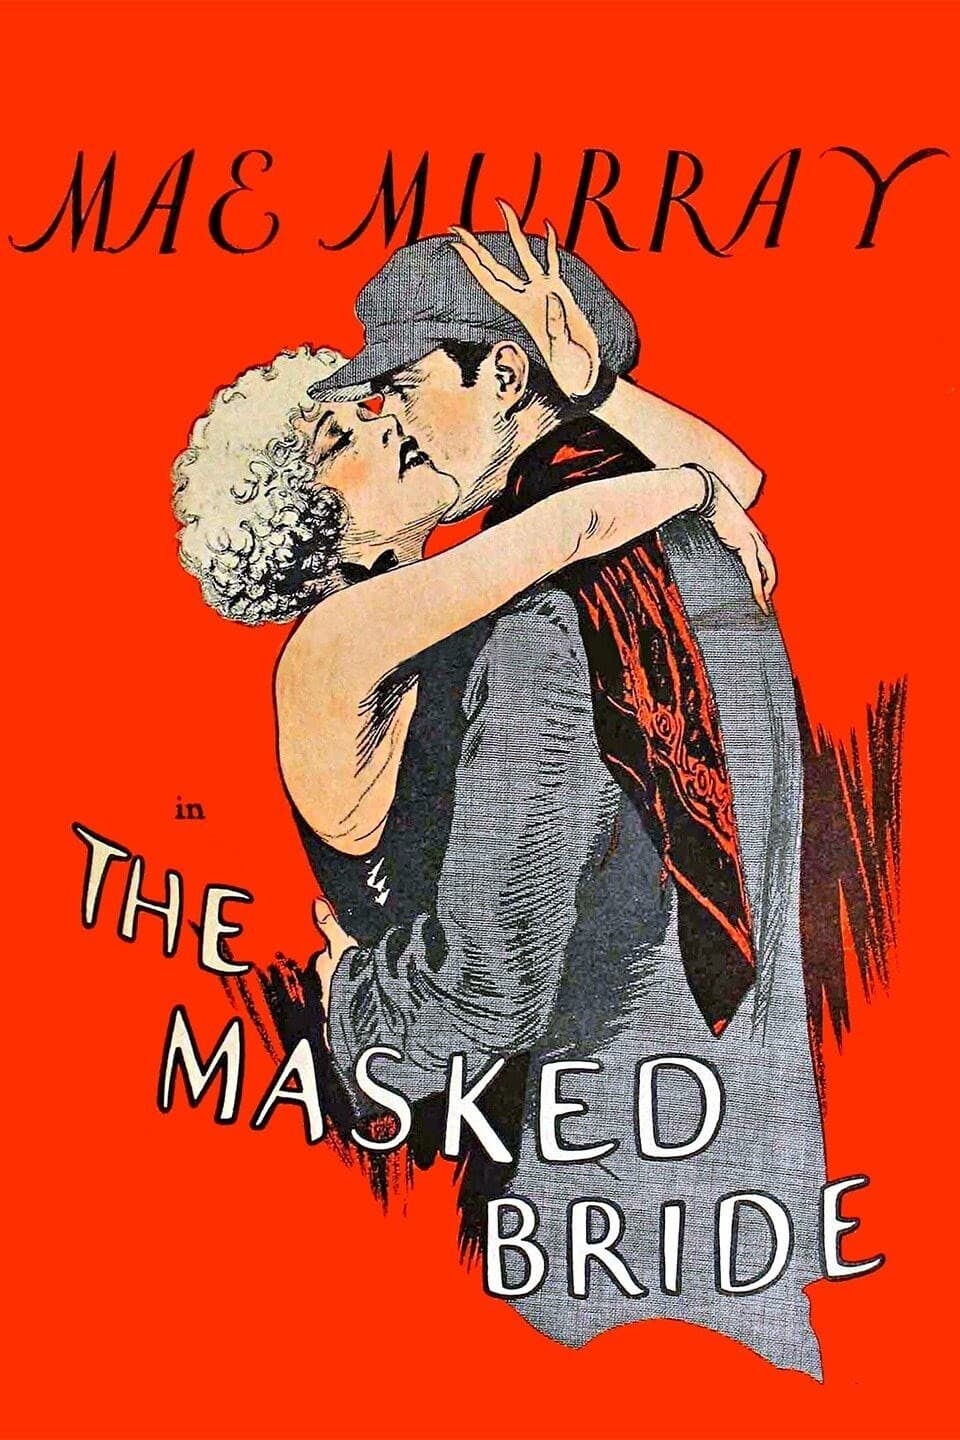 The Masked Bride (1925)